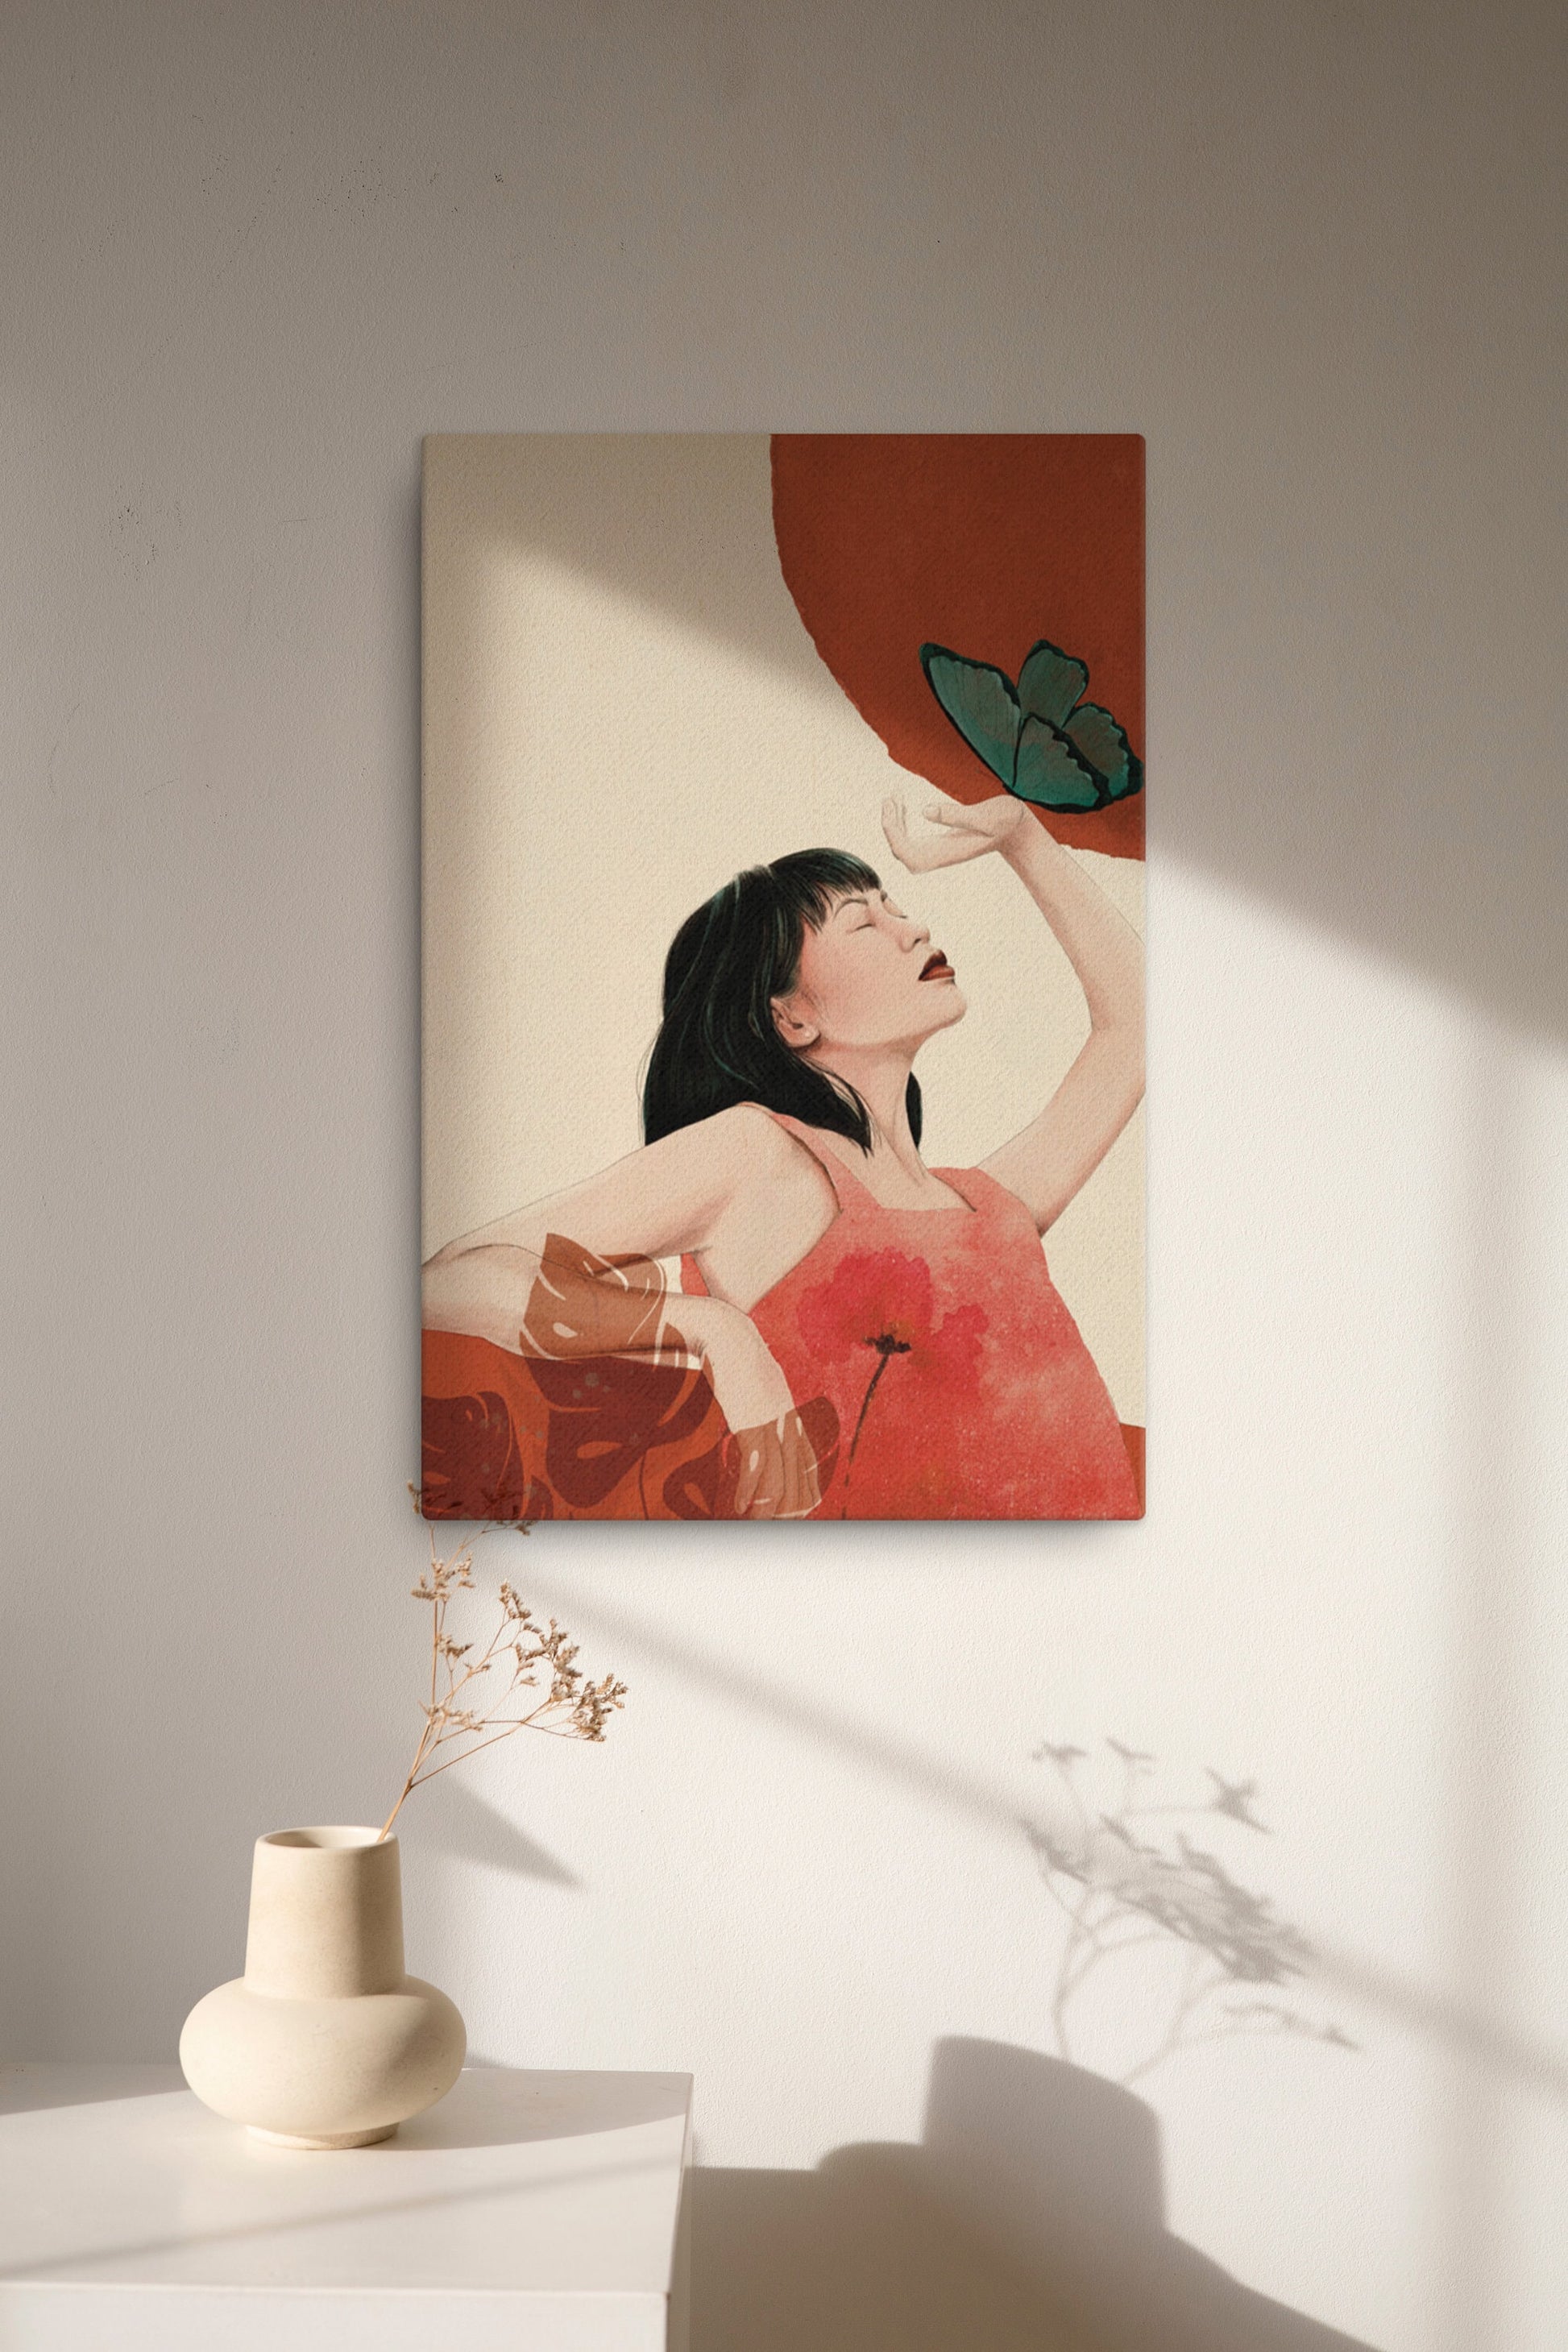 Girl with butterfly sun wall art in earthly colors orange, beige, brown canvas print